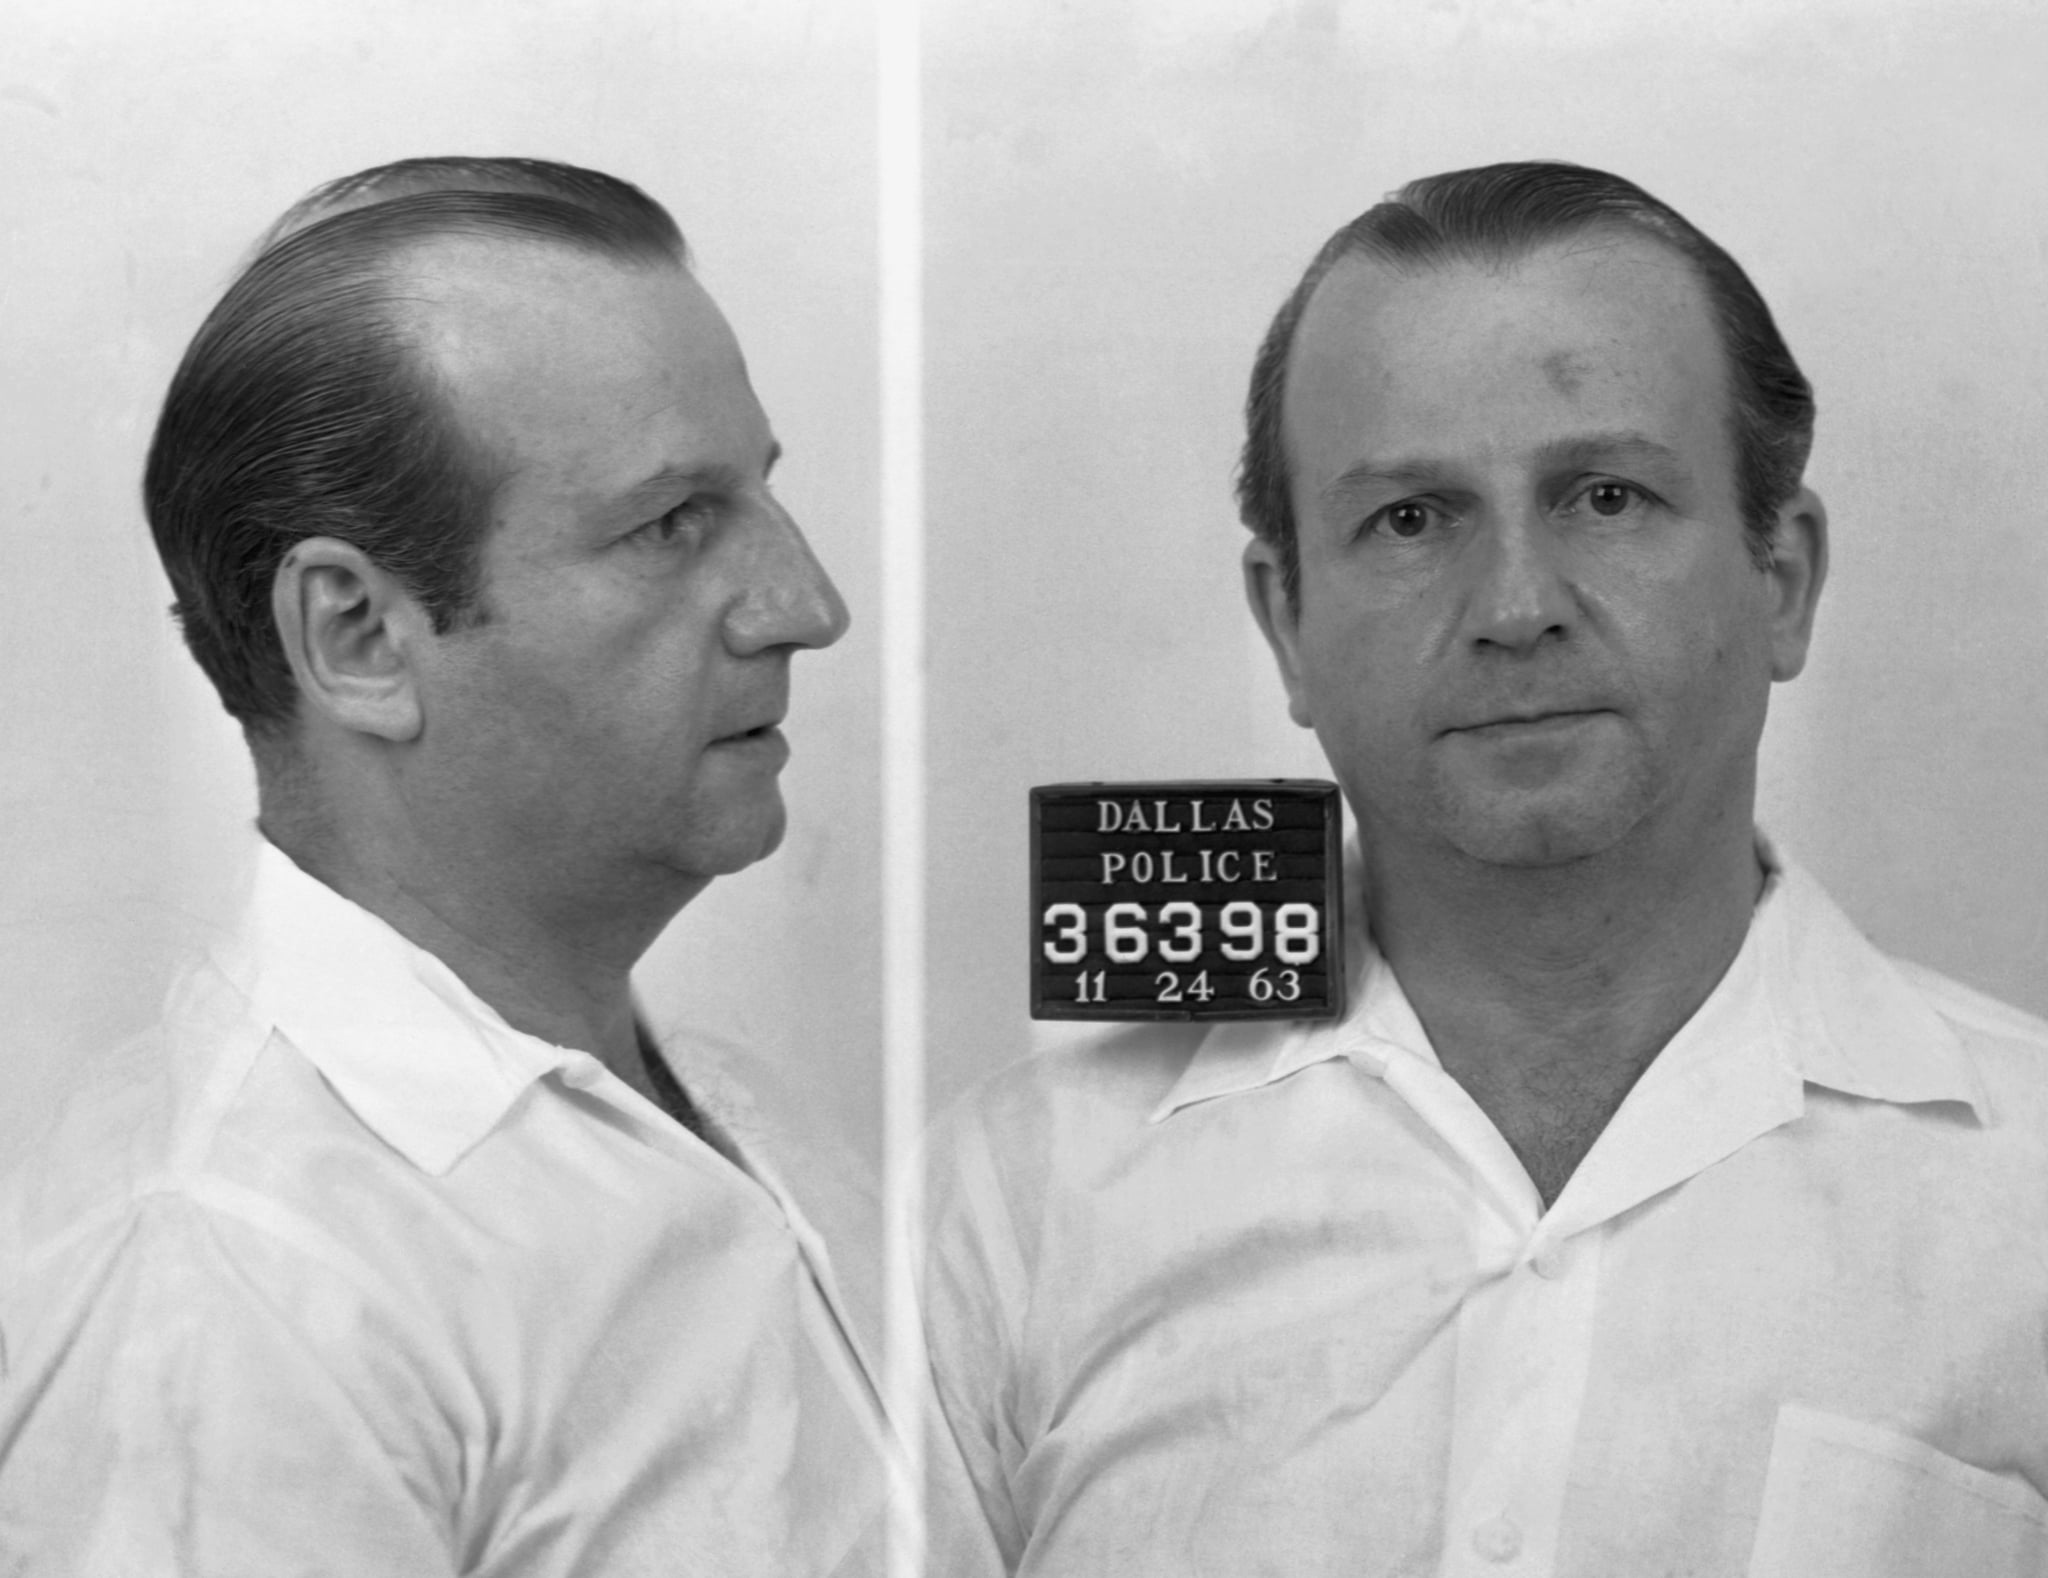 On November 24, 1963, Jack Ruby was arrested for murdering Lee Harvey Oswald, who had been arrested on charges of assassinating President Kennedy and murdering a Dallas police officer two days earlier. (Photo by © CORBIS/Corbis via Getty Images)